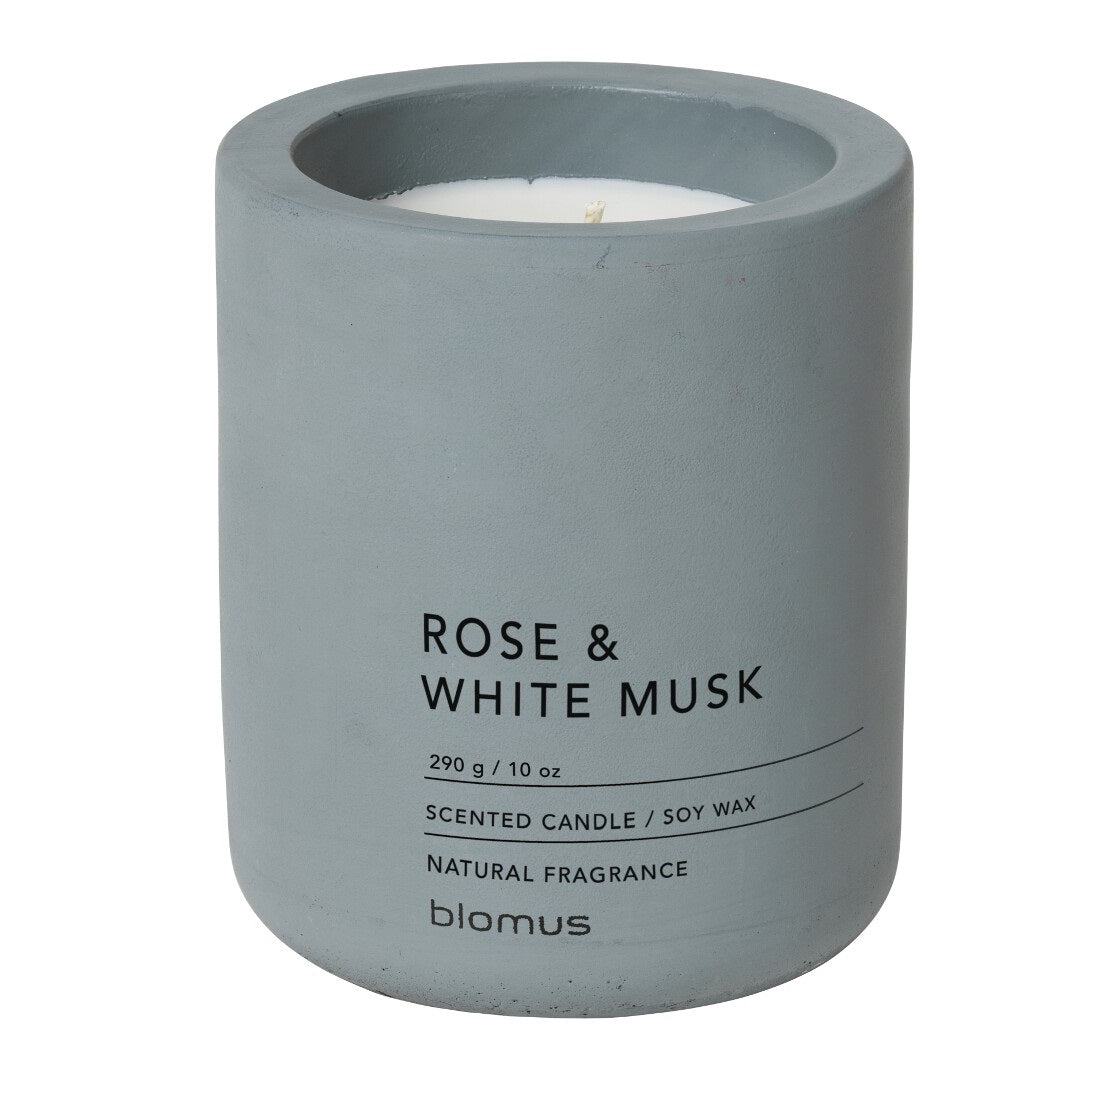 Blomus Scented Candle: Rose & White Musk in Blue-Grey Container FRAGA 9cm